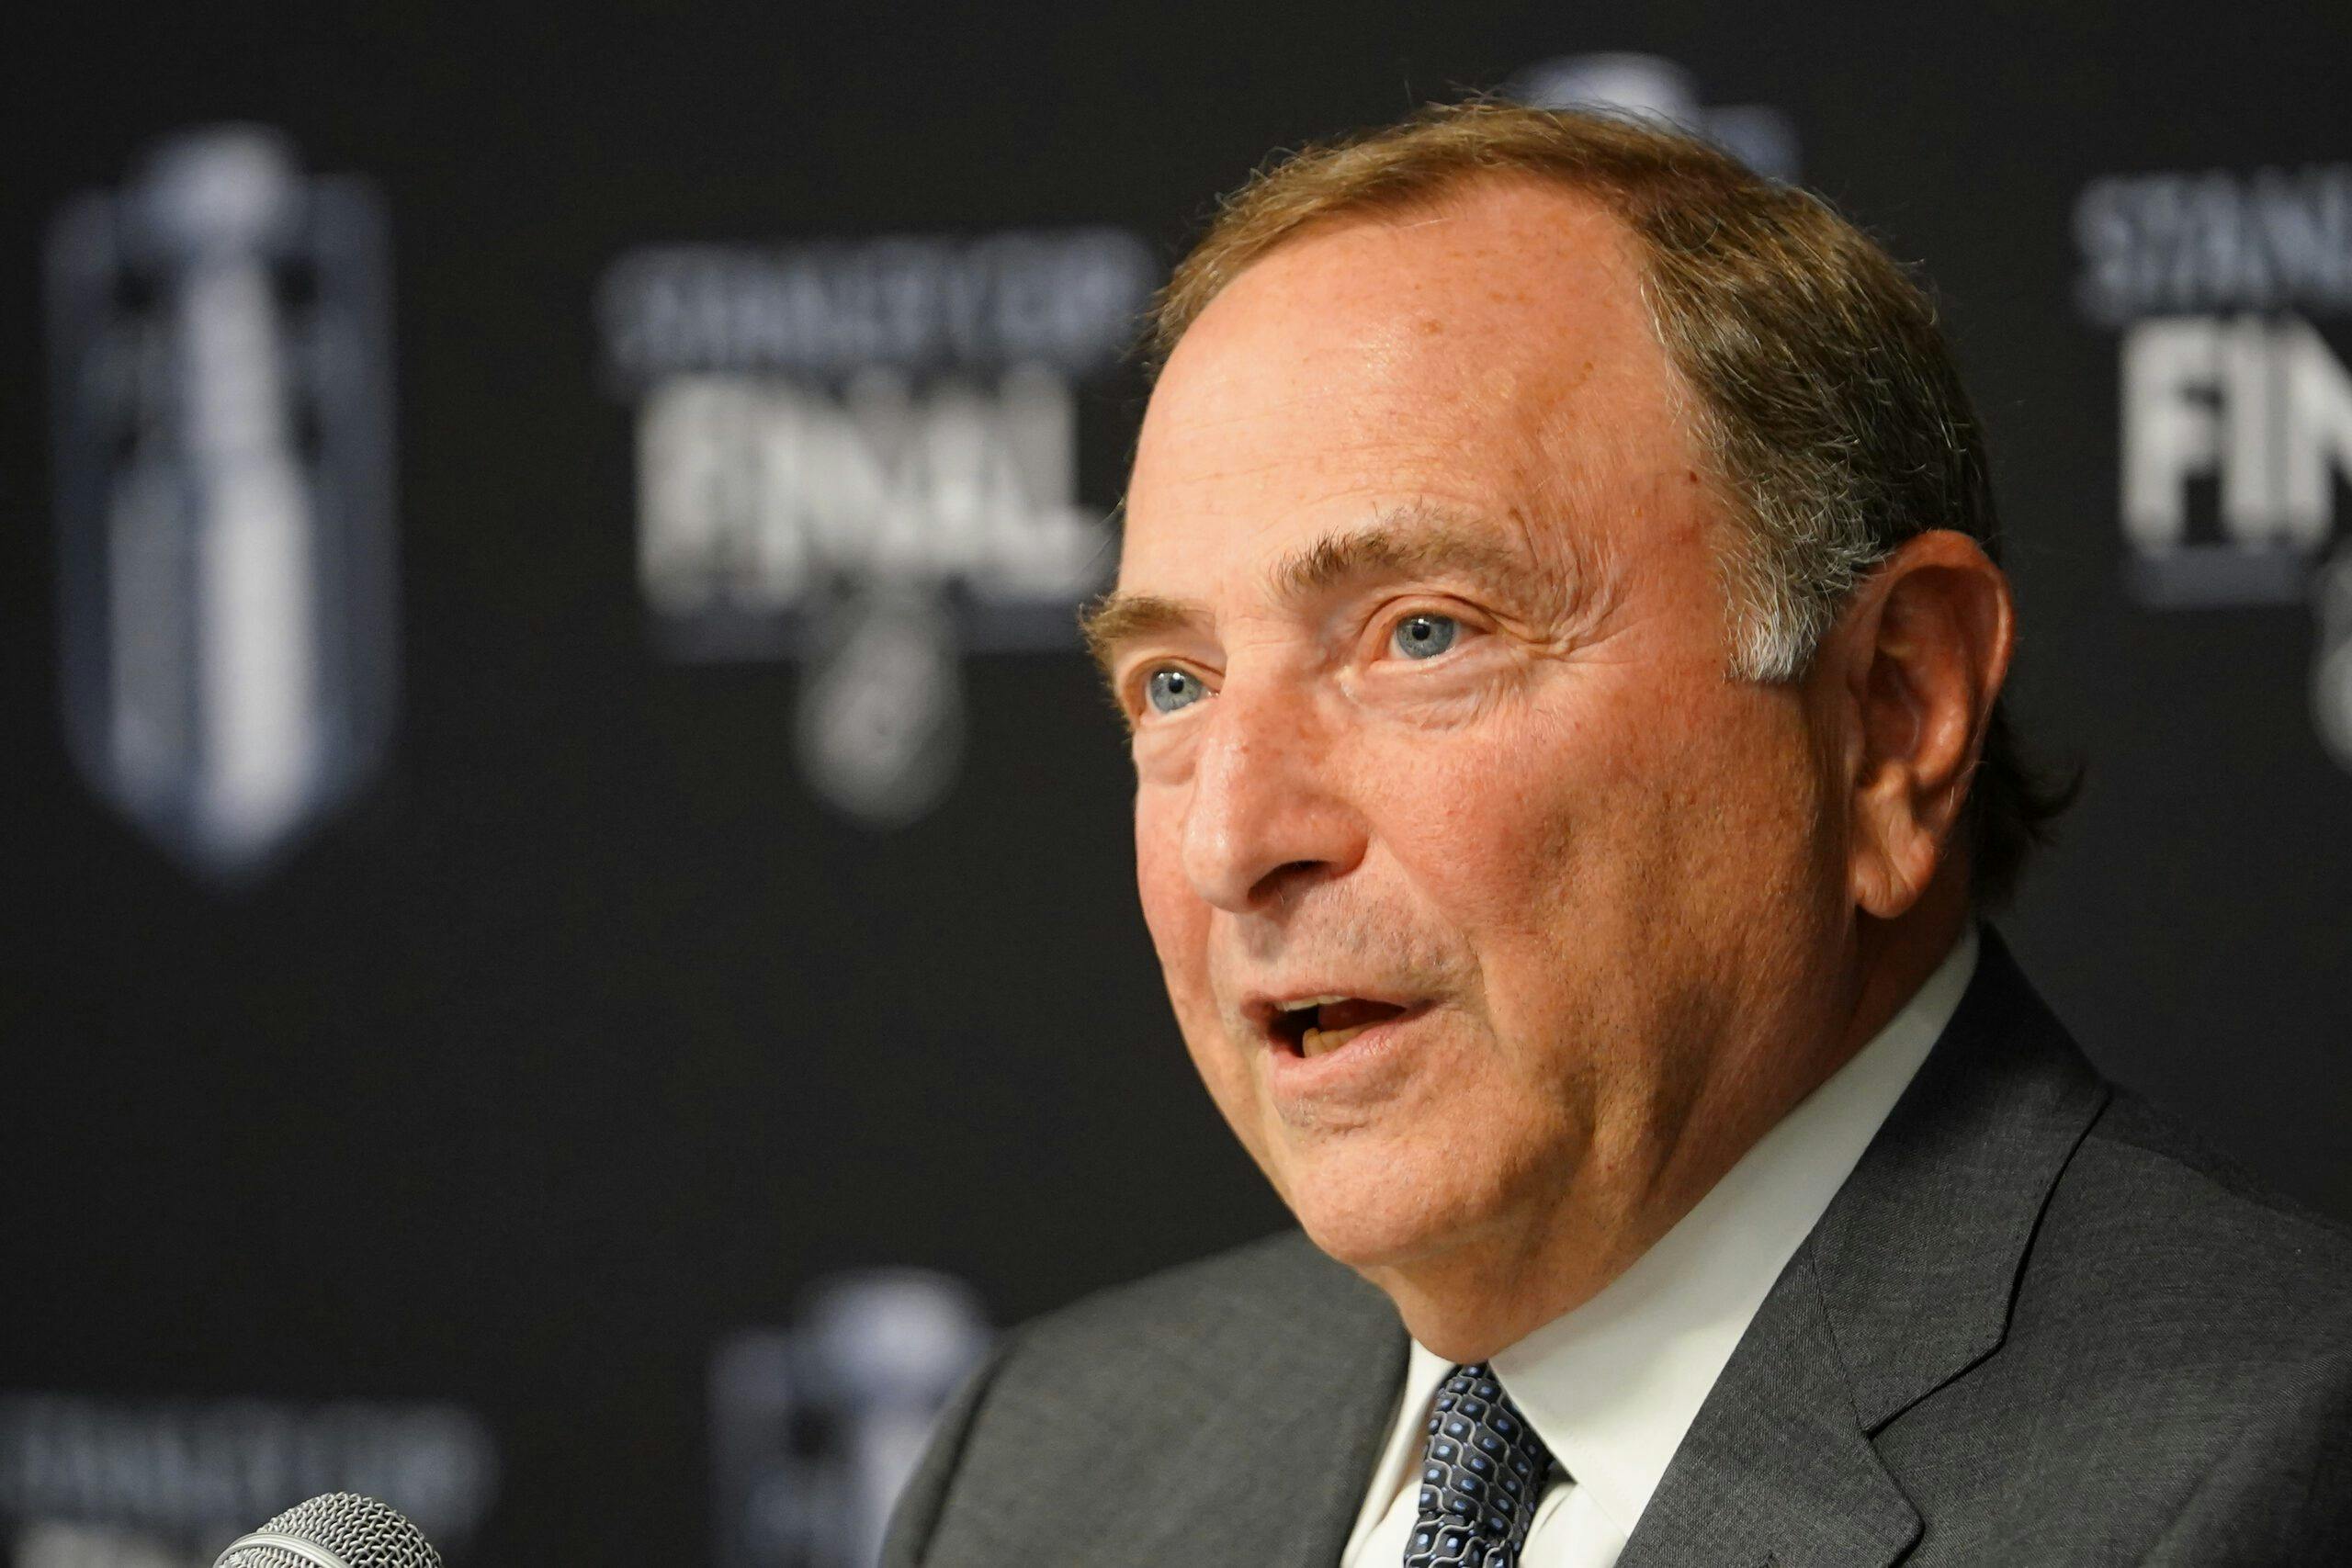 NHL commissioner Bettman ‘would be surprised’ if Hockey Canada 2018 players facing sexual assault charges play during judicial process